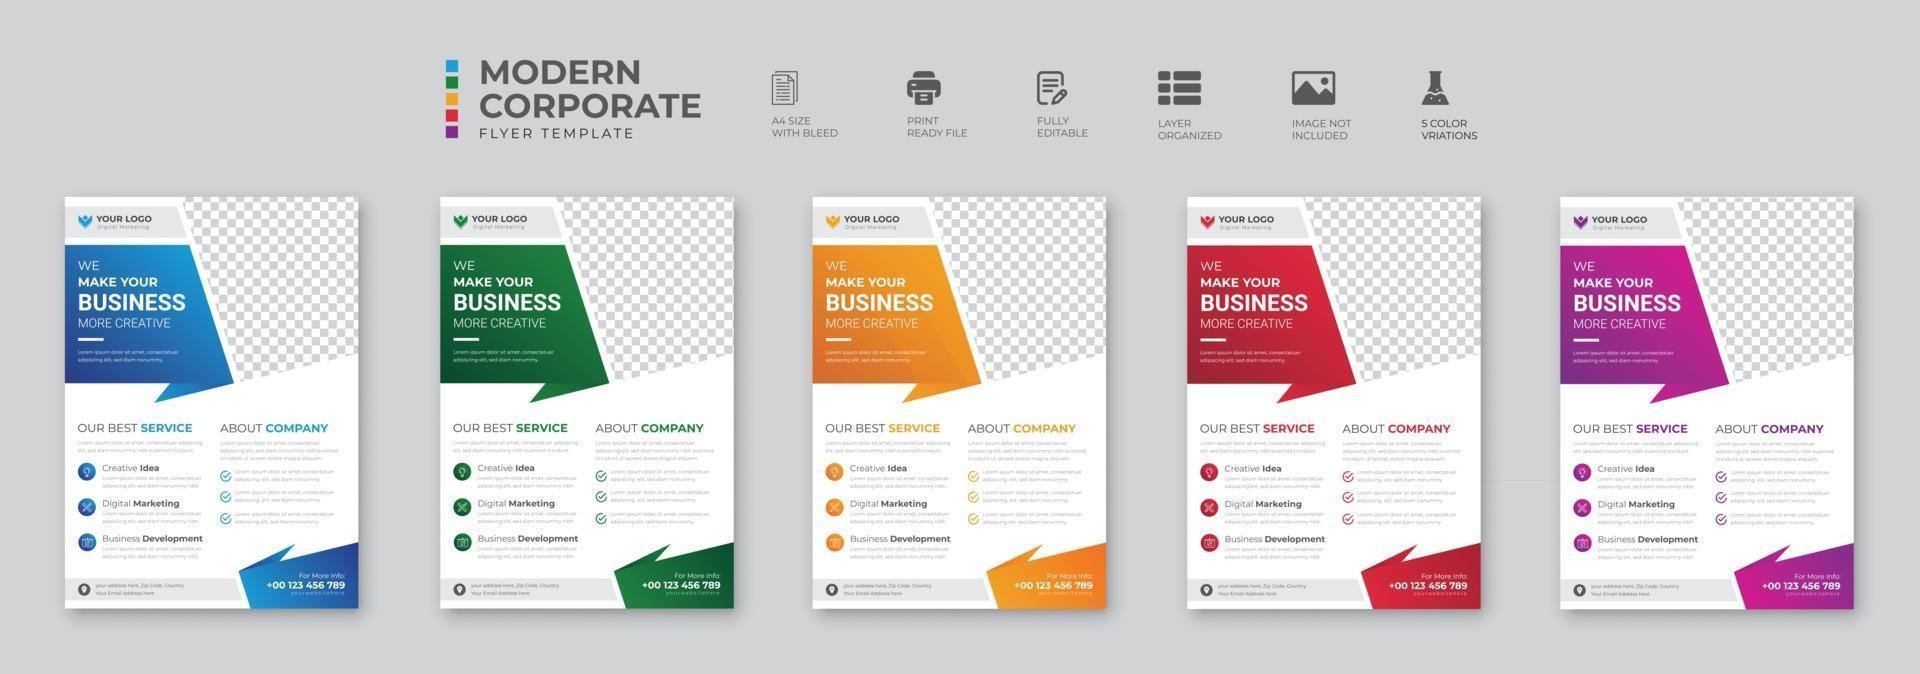 Creative corporate and business flyer brochure template design vector